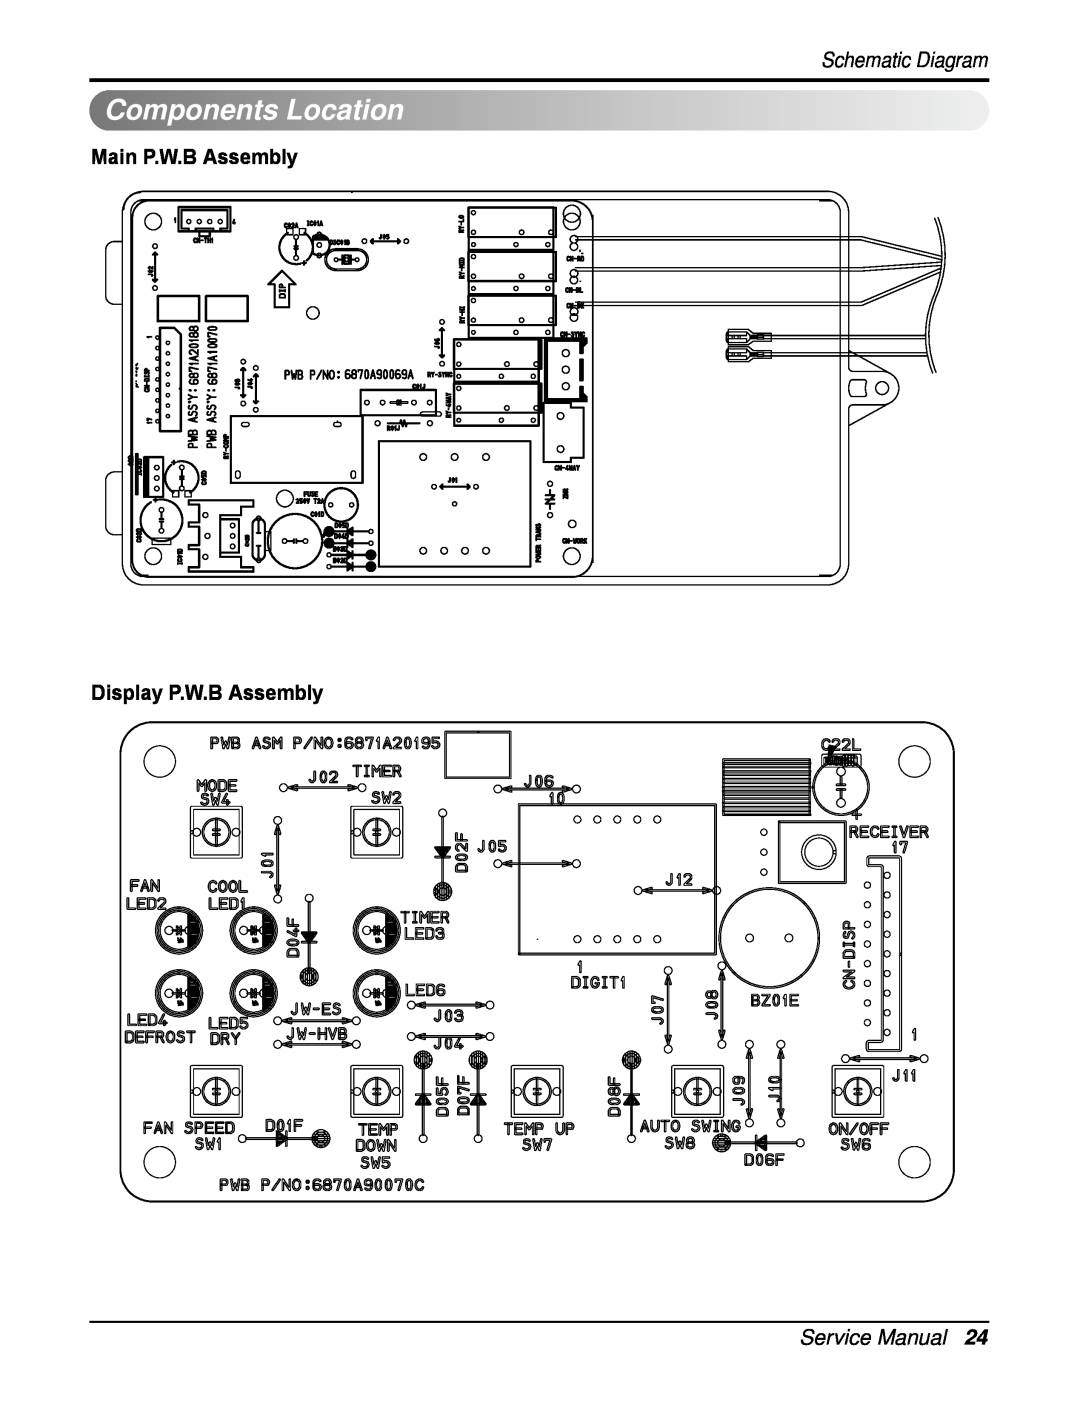 Heat Controller RAD-243A, RAD-183A ComponentsLocation, Main P.W.B Assembly Display P.W.B Assembly, Schematic Diagram 